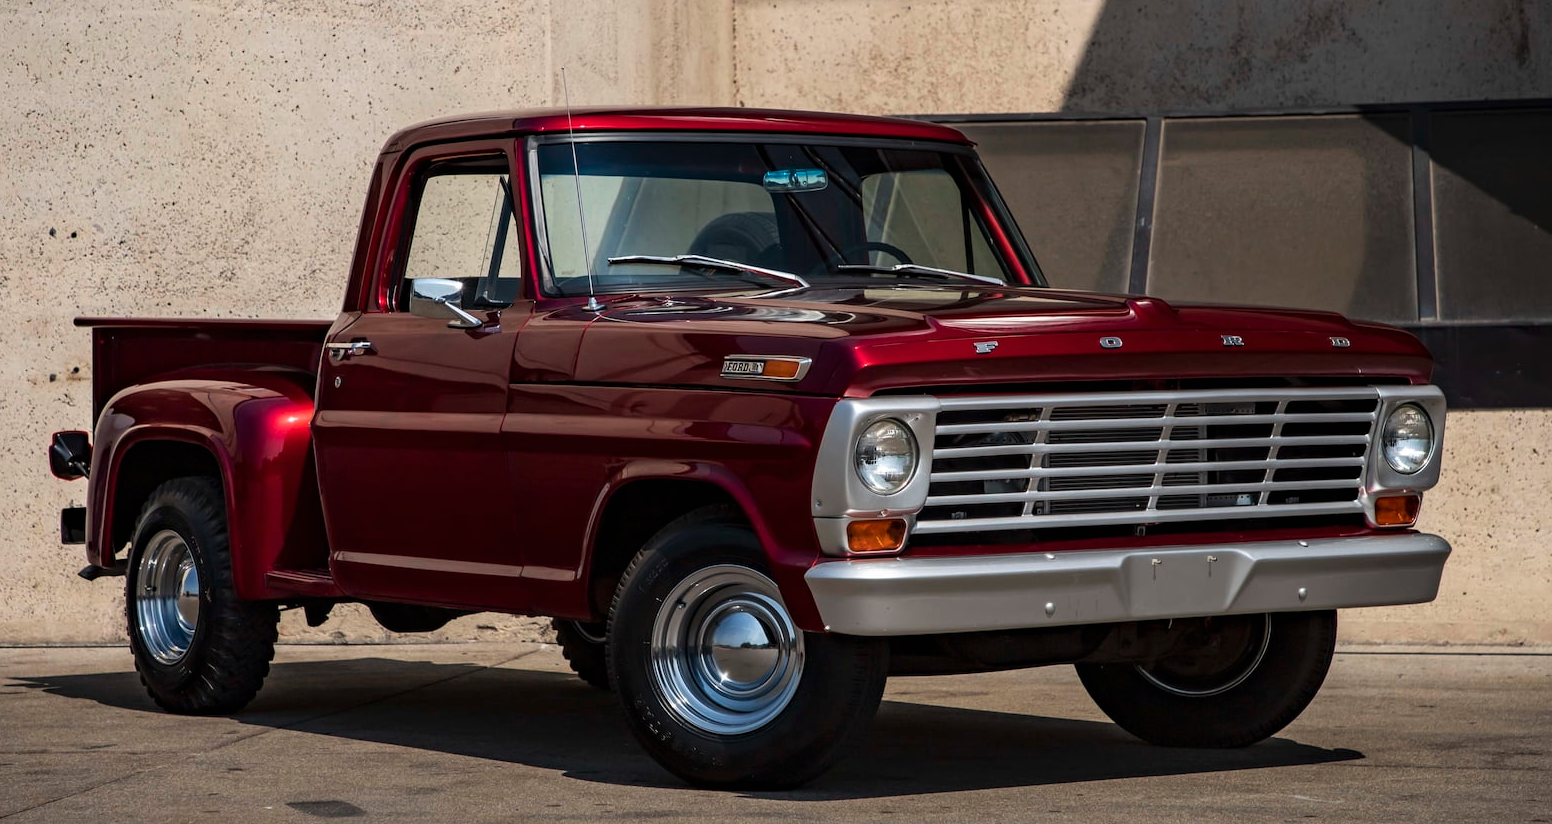 Ford Truck History From the Model TT to the Modern FSeries